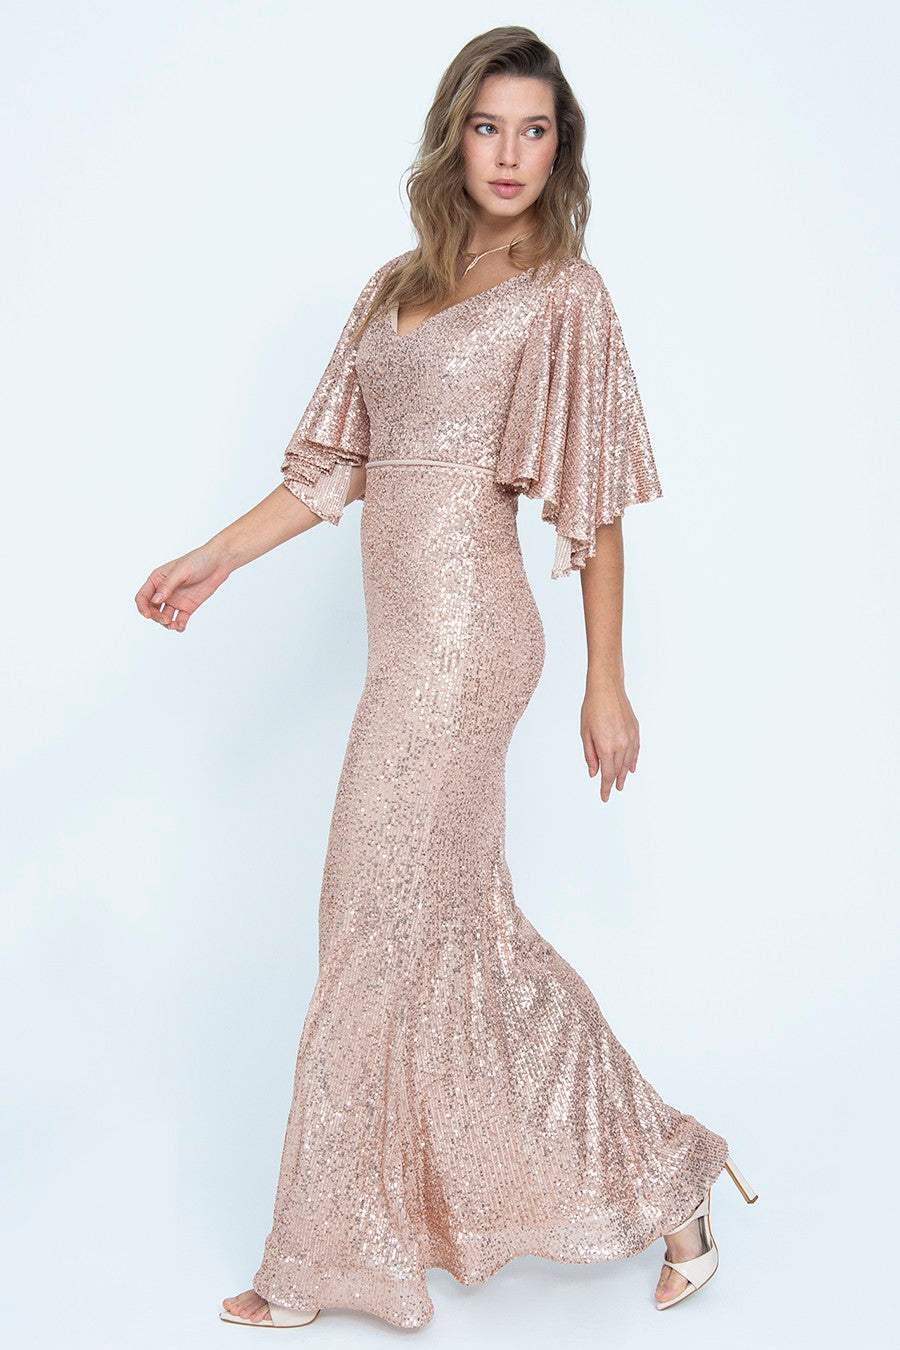 Anna - Mystic Evenings | Evening and Prom Dresses